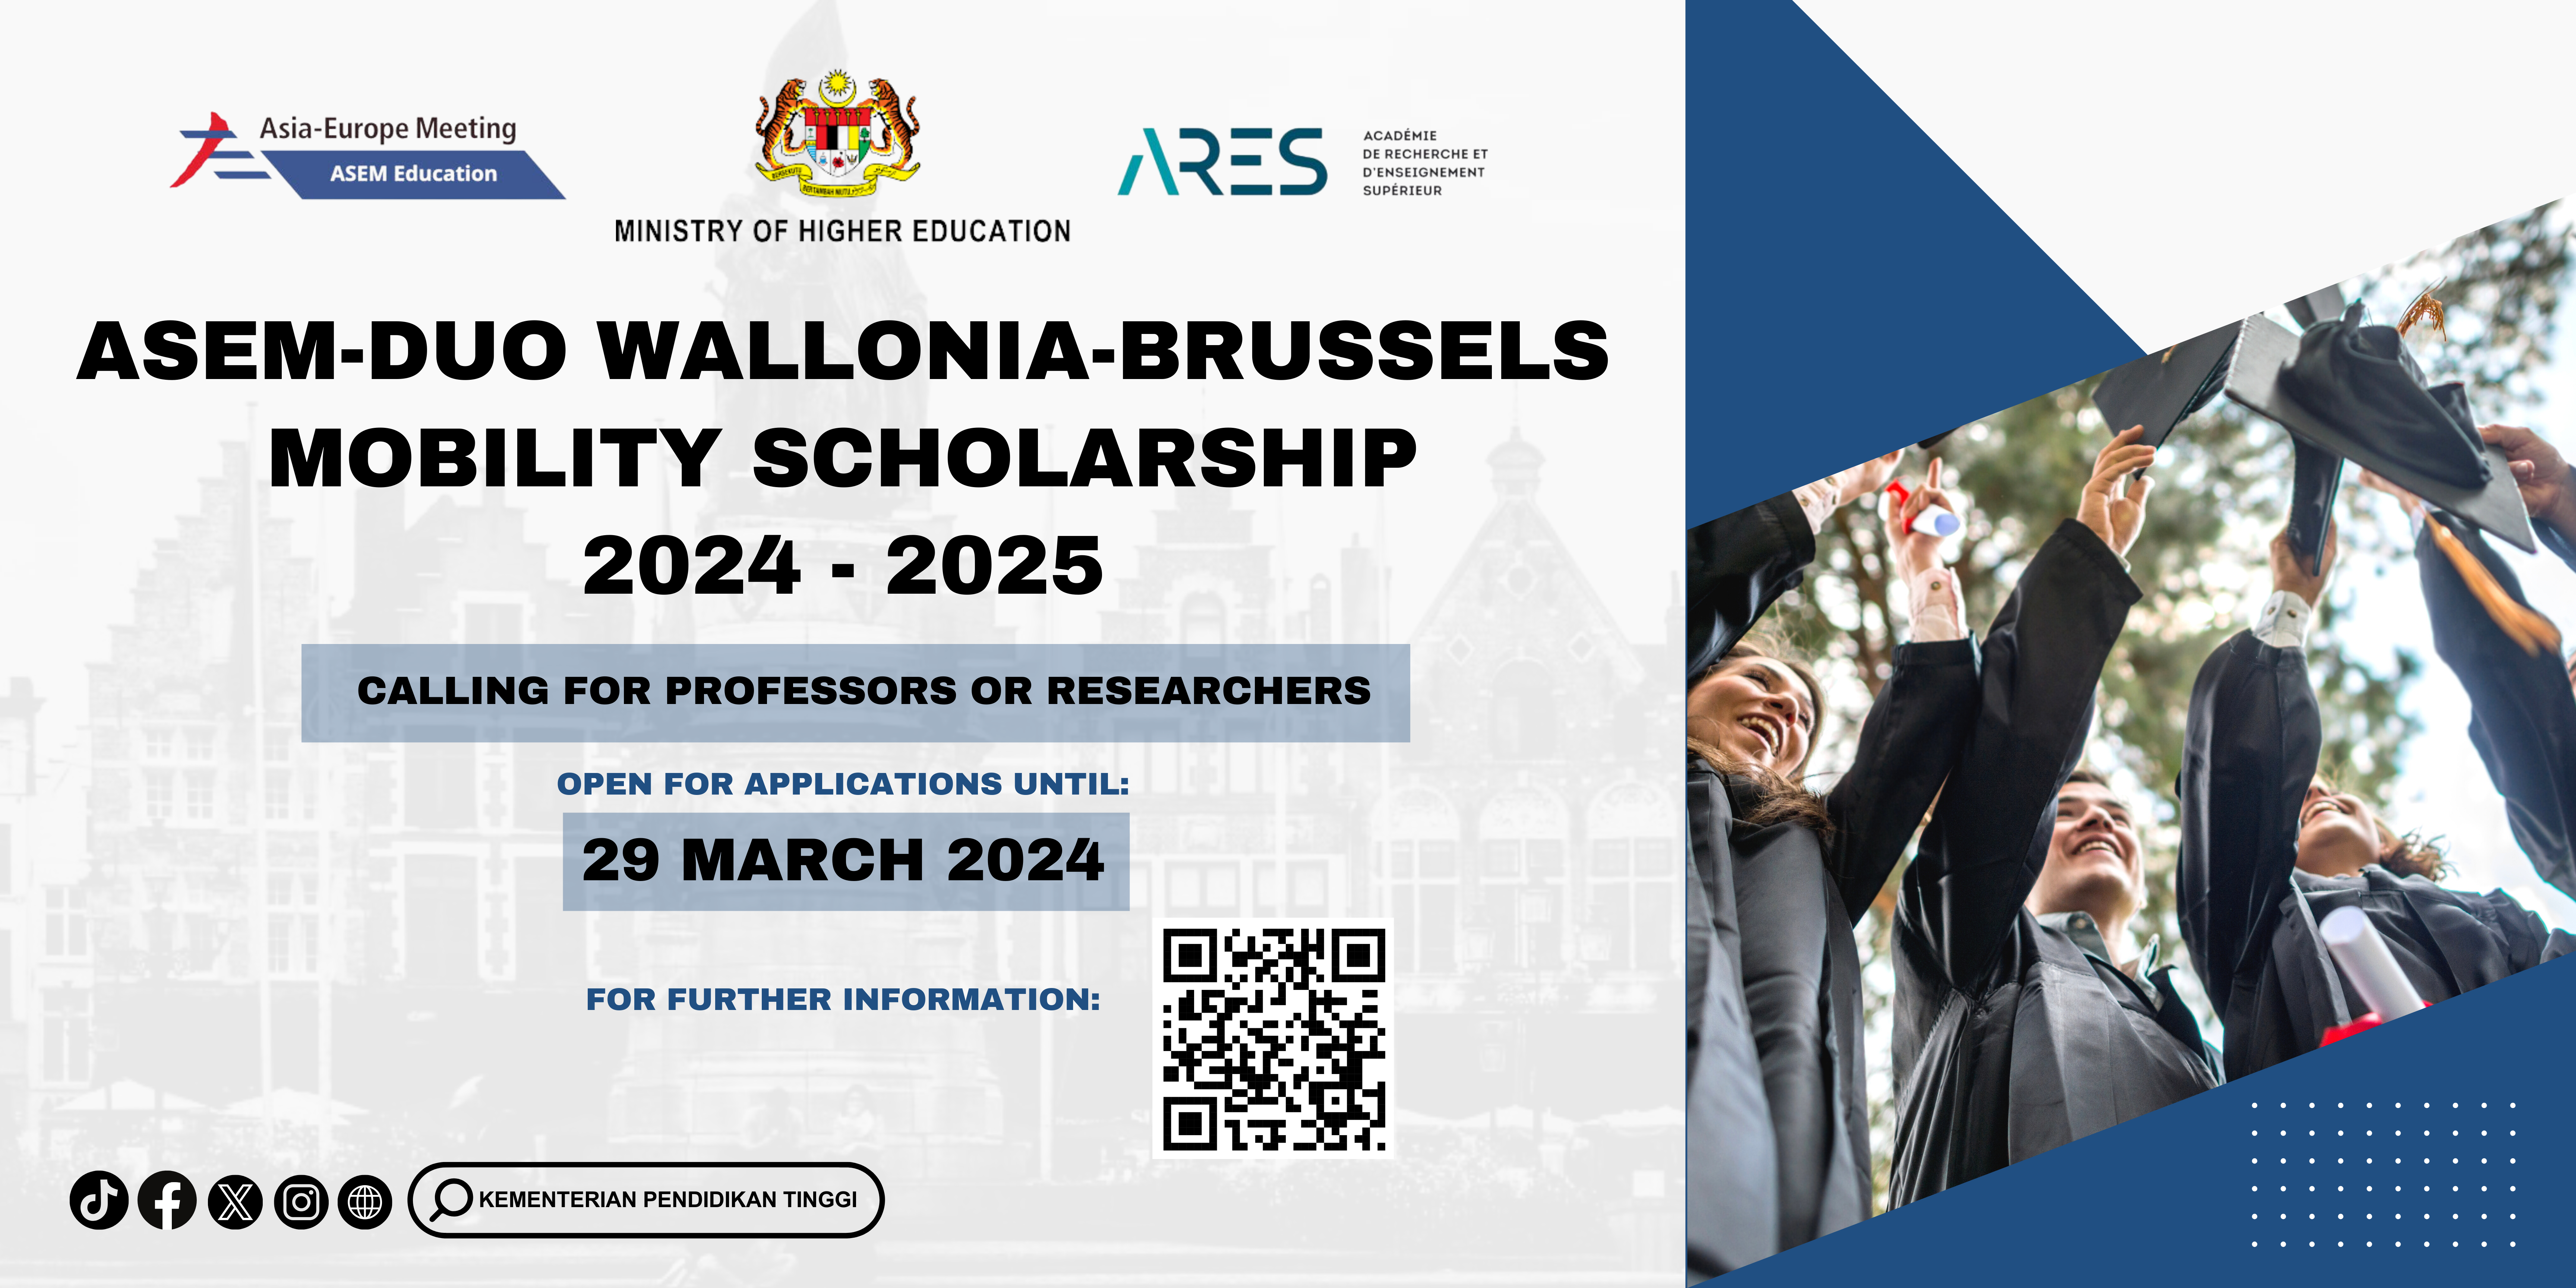 ASEM-DUO WALLONIA-BRUSSELS MOBILITY SCHOLARSHIP 2024 - 2025